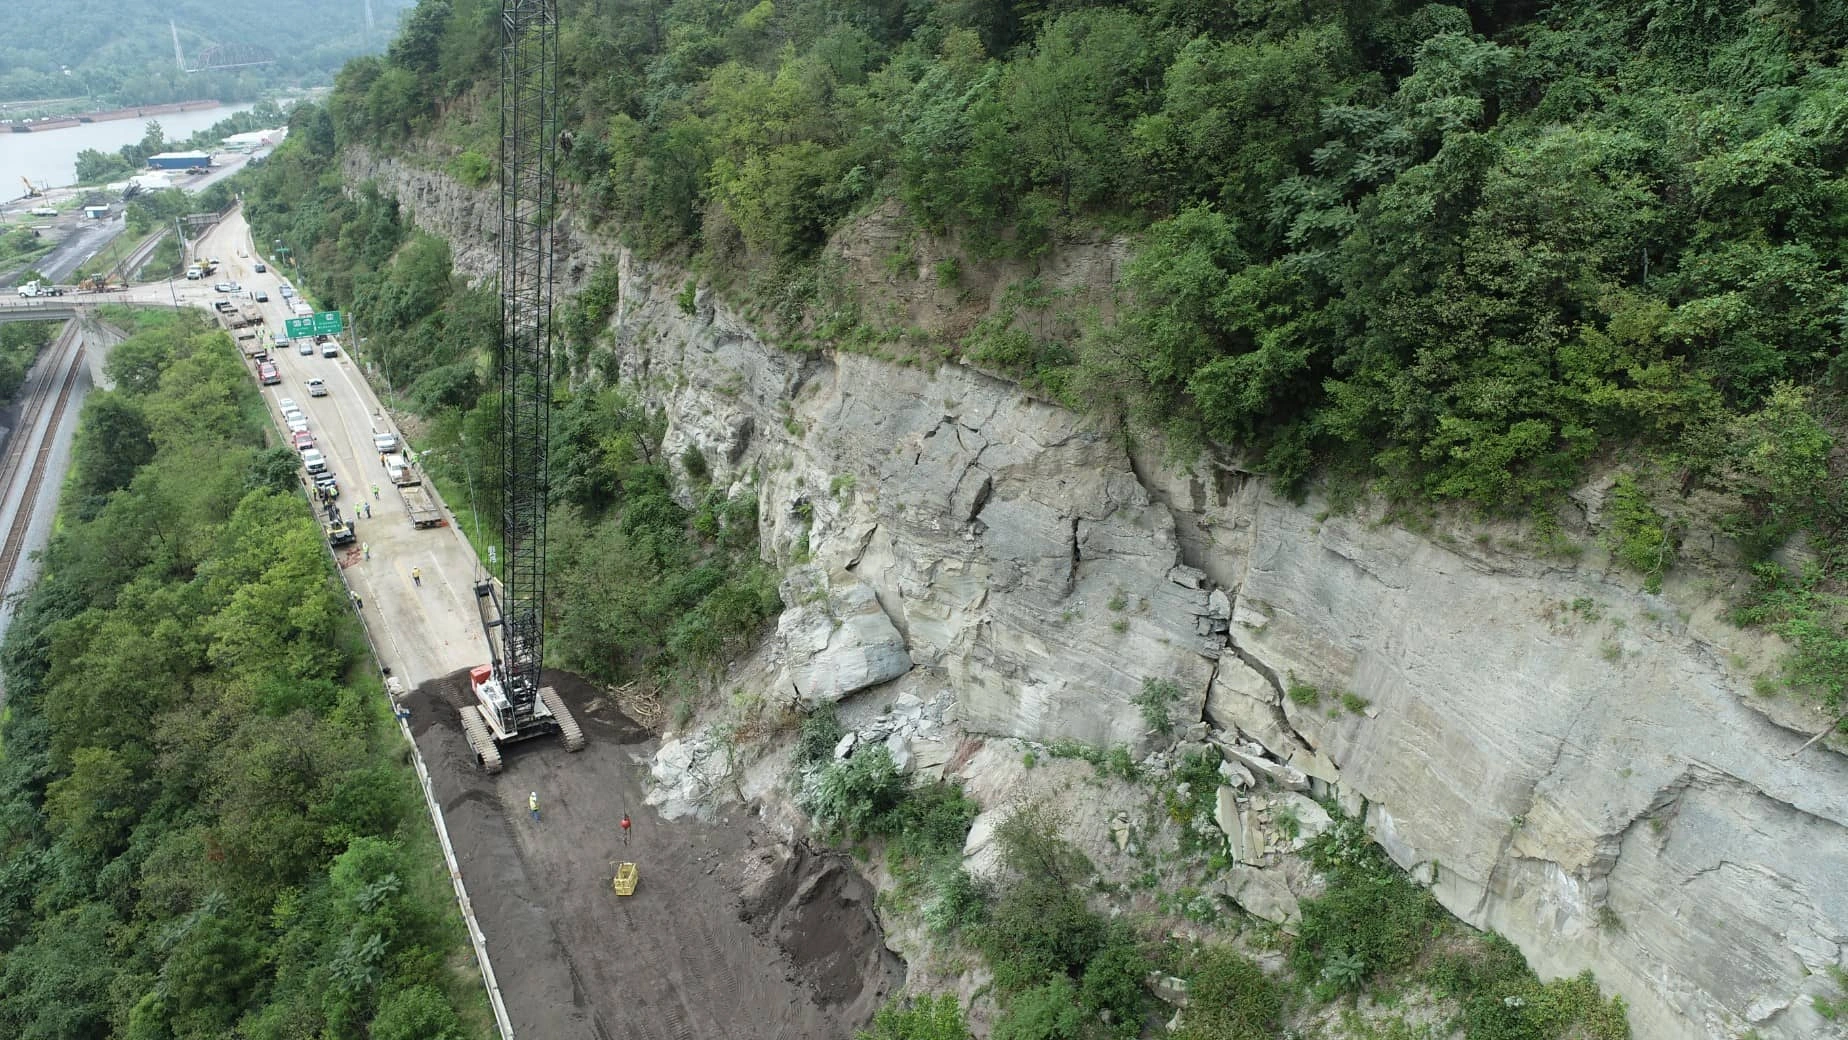 An aerial photo shows a crane and crew working on roadway next to train tracks and a river.